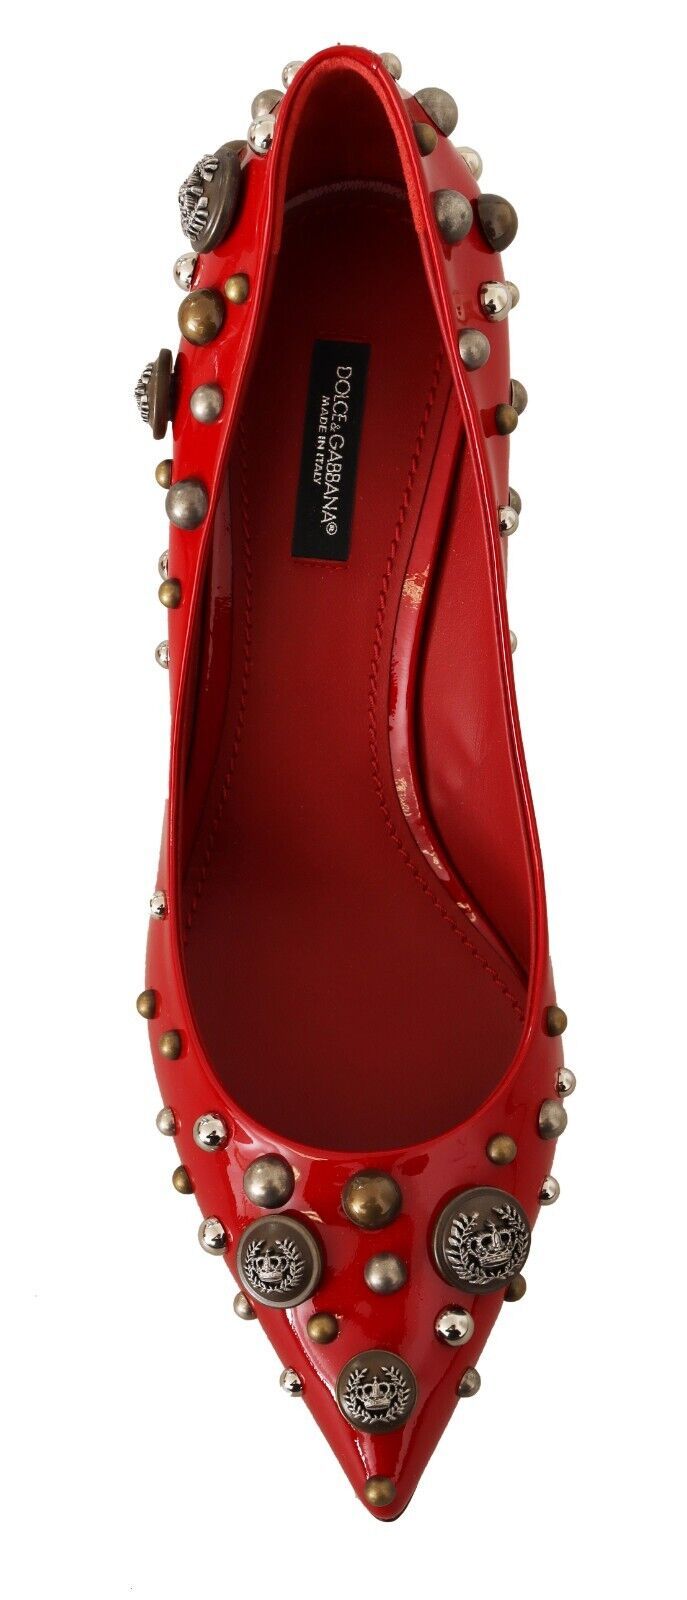 Radiant Red Patent Leather Pumps with Stud Accents